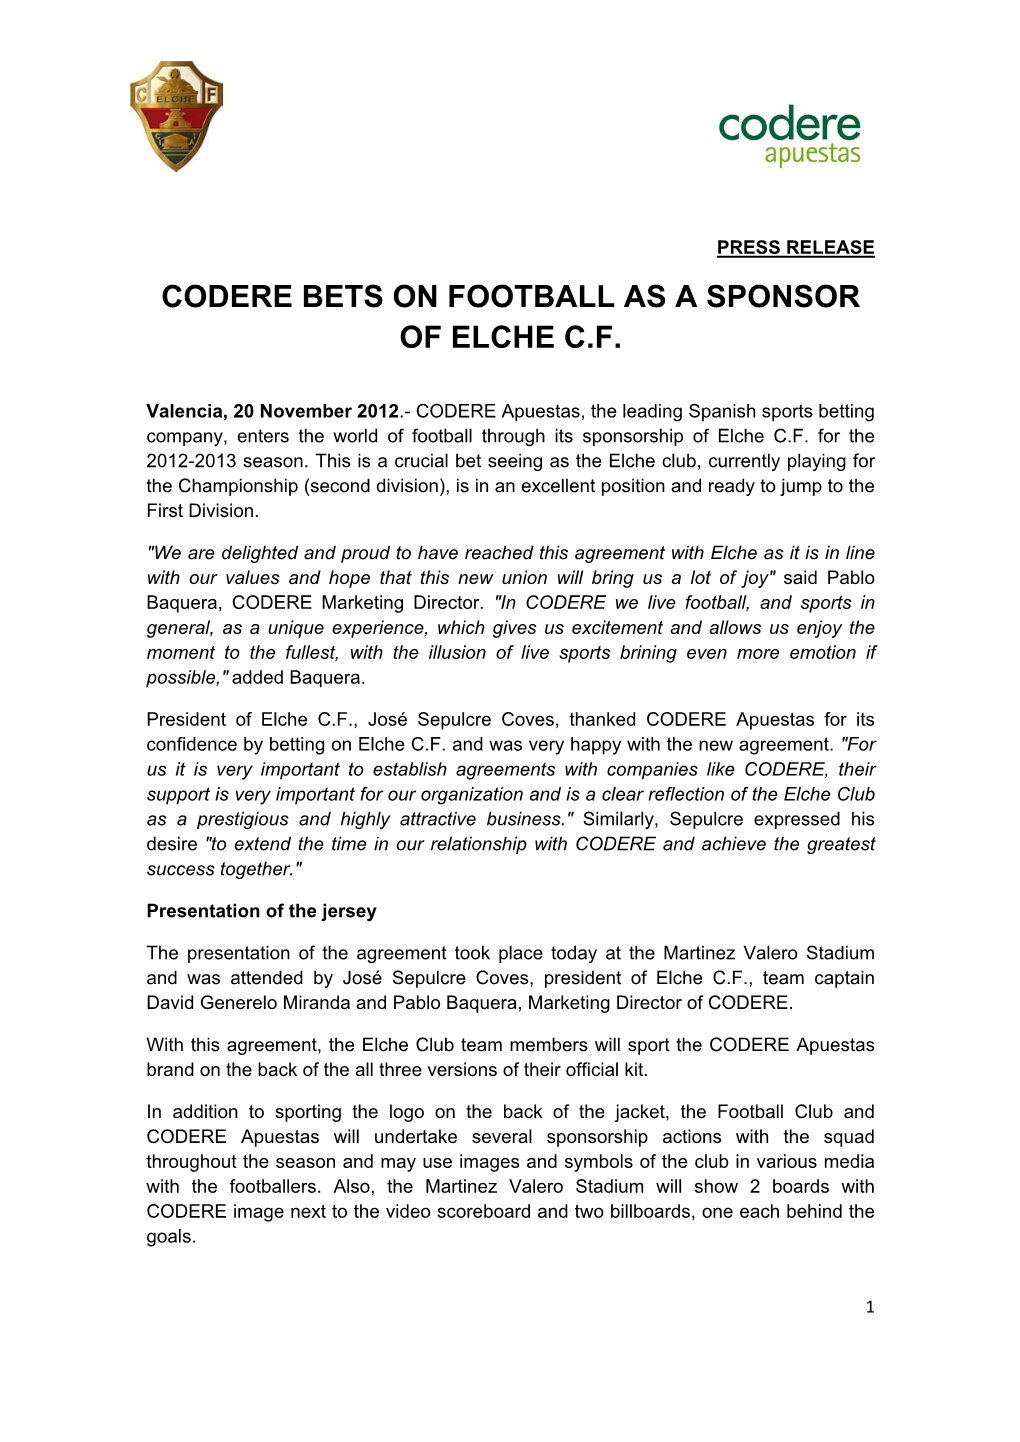 Codere Bets on Football As a Sponsor of Elche C.F